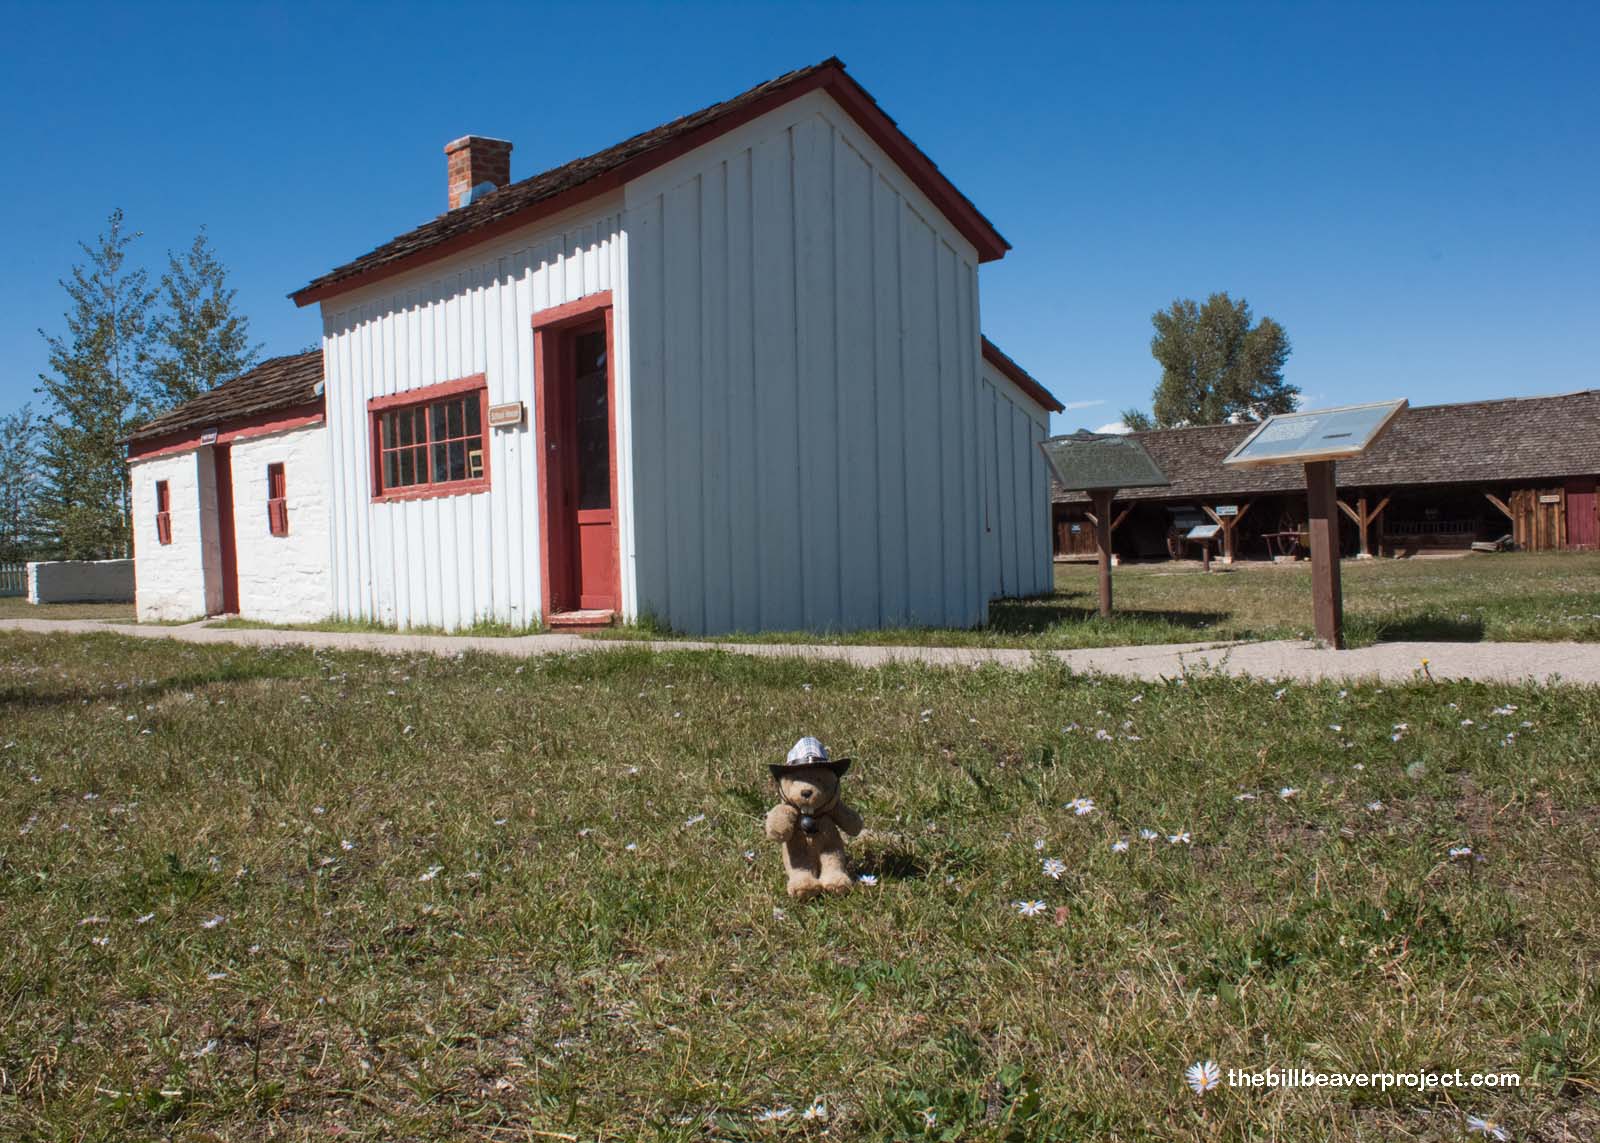 The First School House in Wyoming